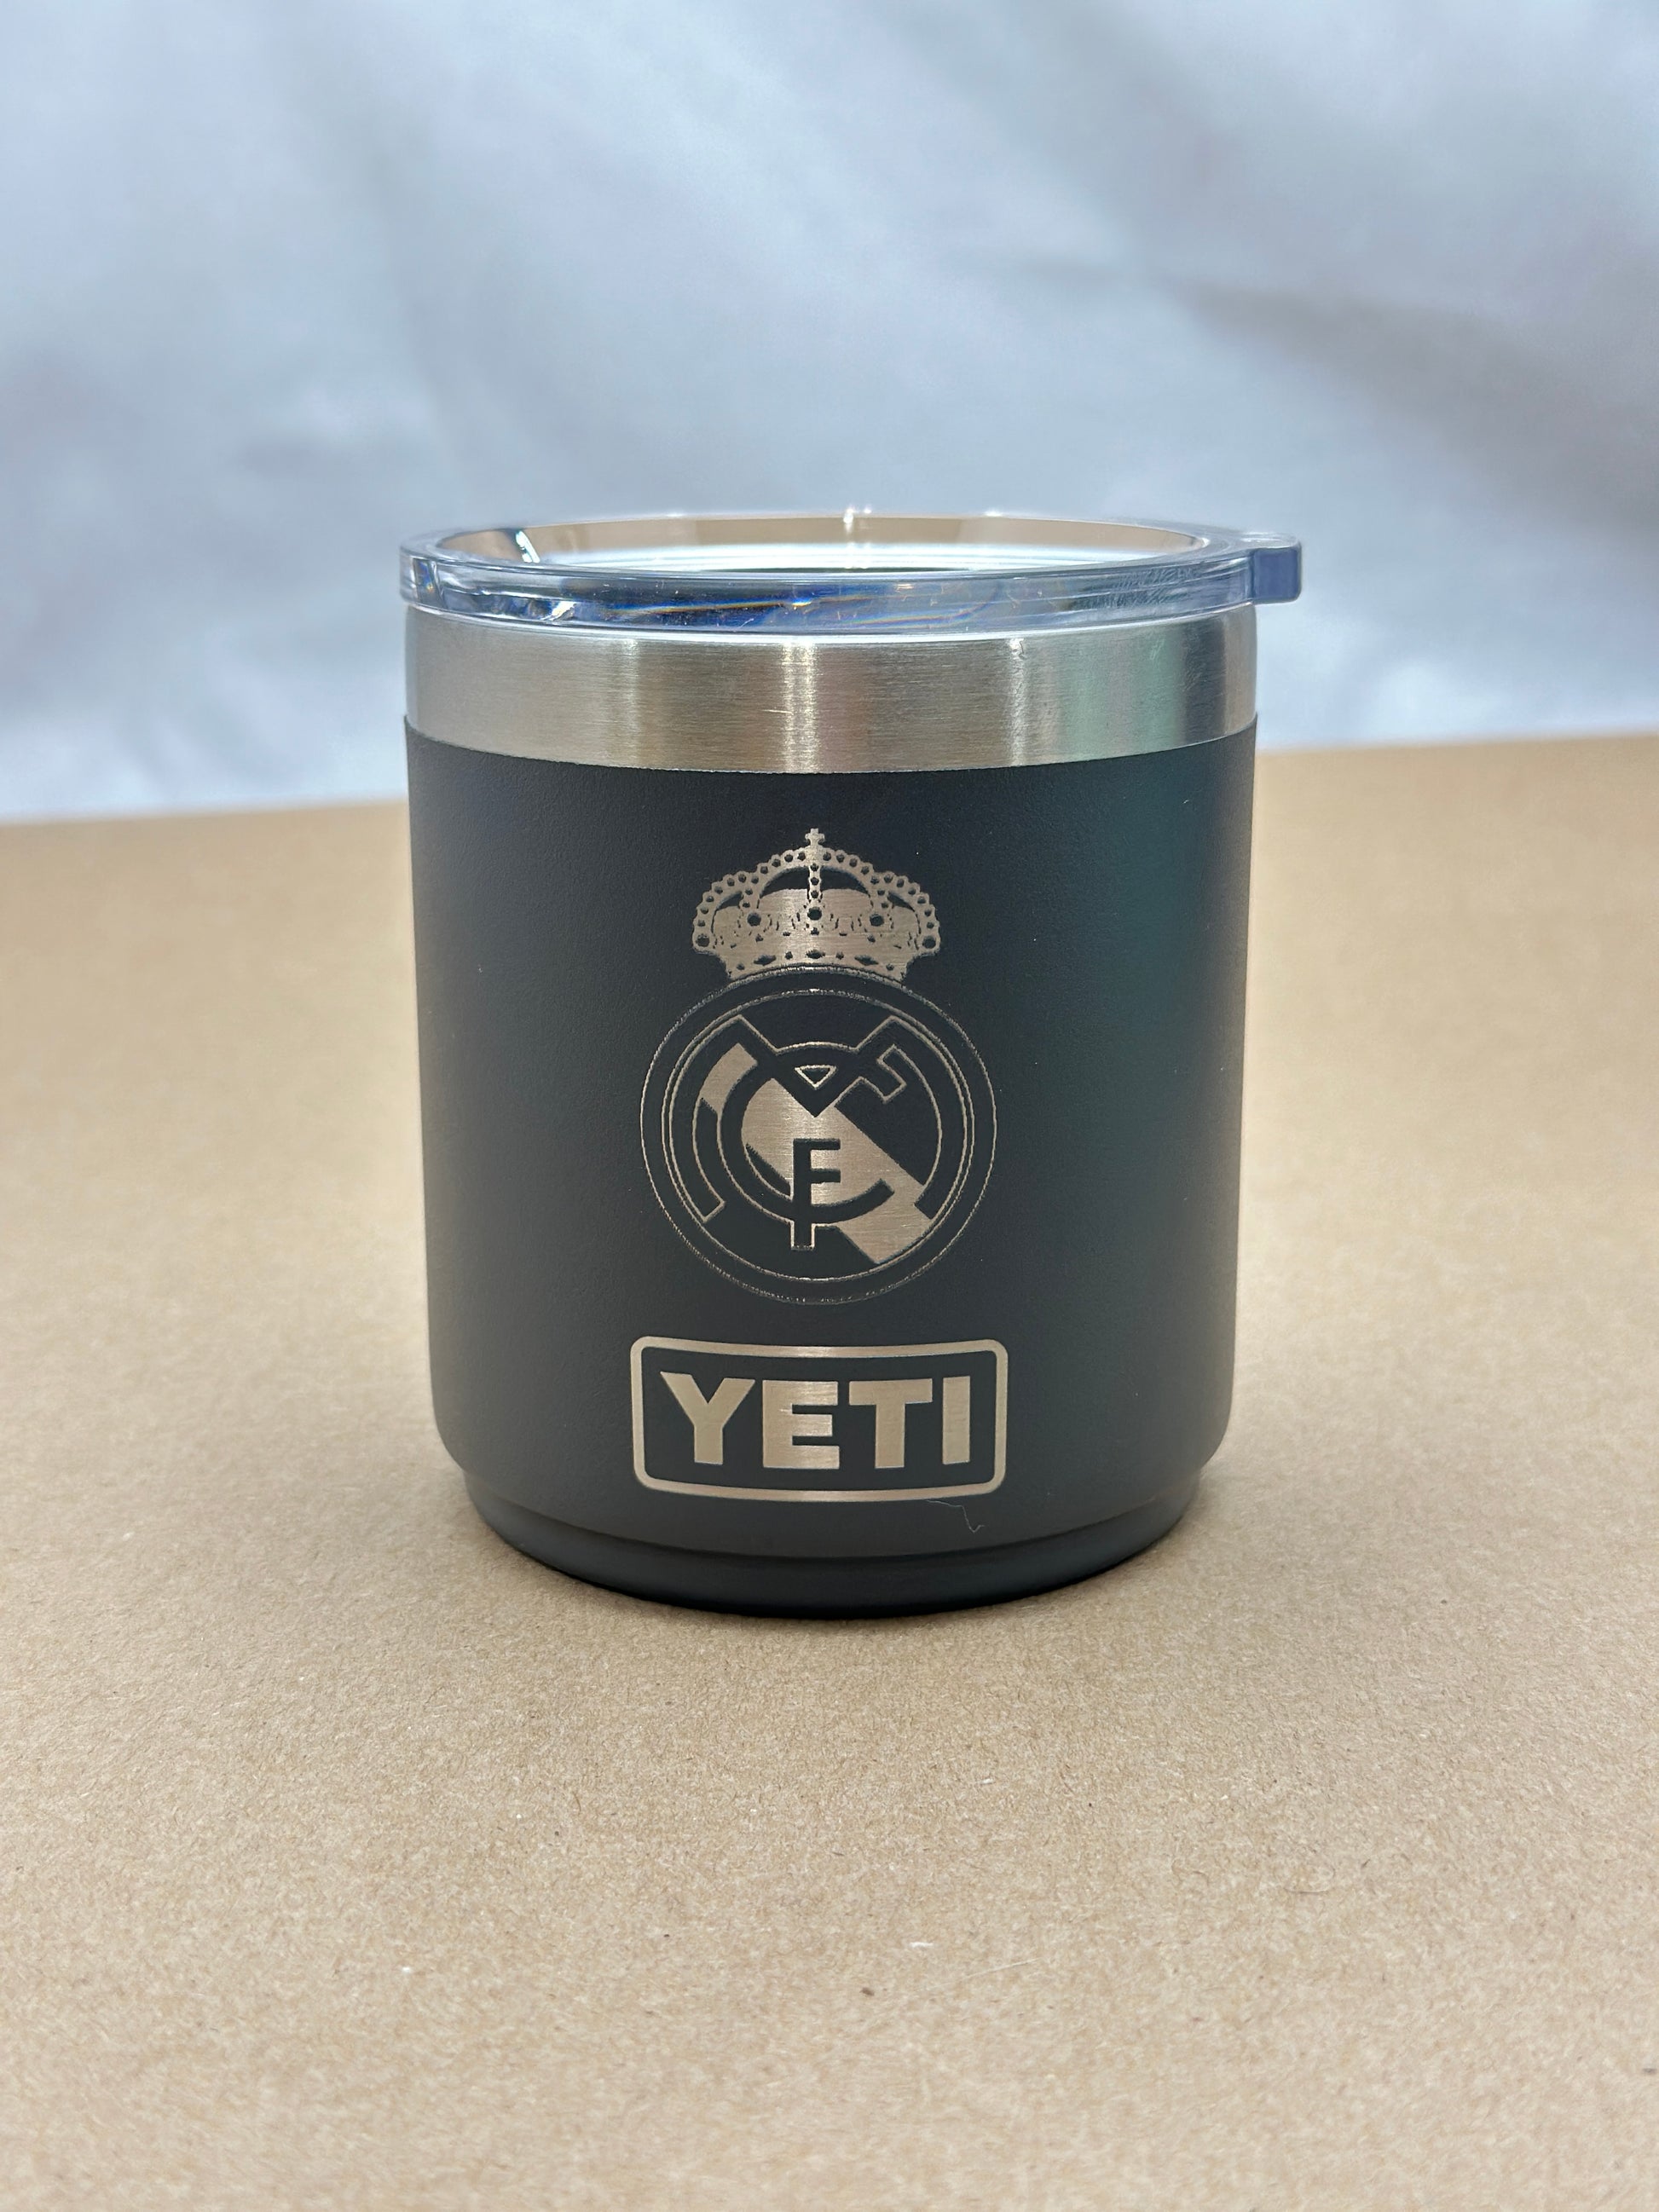 Laser Engraved Authentic Yeti Rambler 12 Oz. COLSTER SLIM Can Insulator  Seafoam Stainless Steel Personalized Vacuum Insulated YETI 